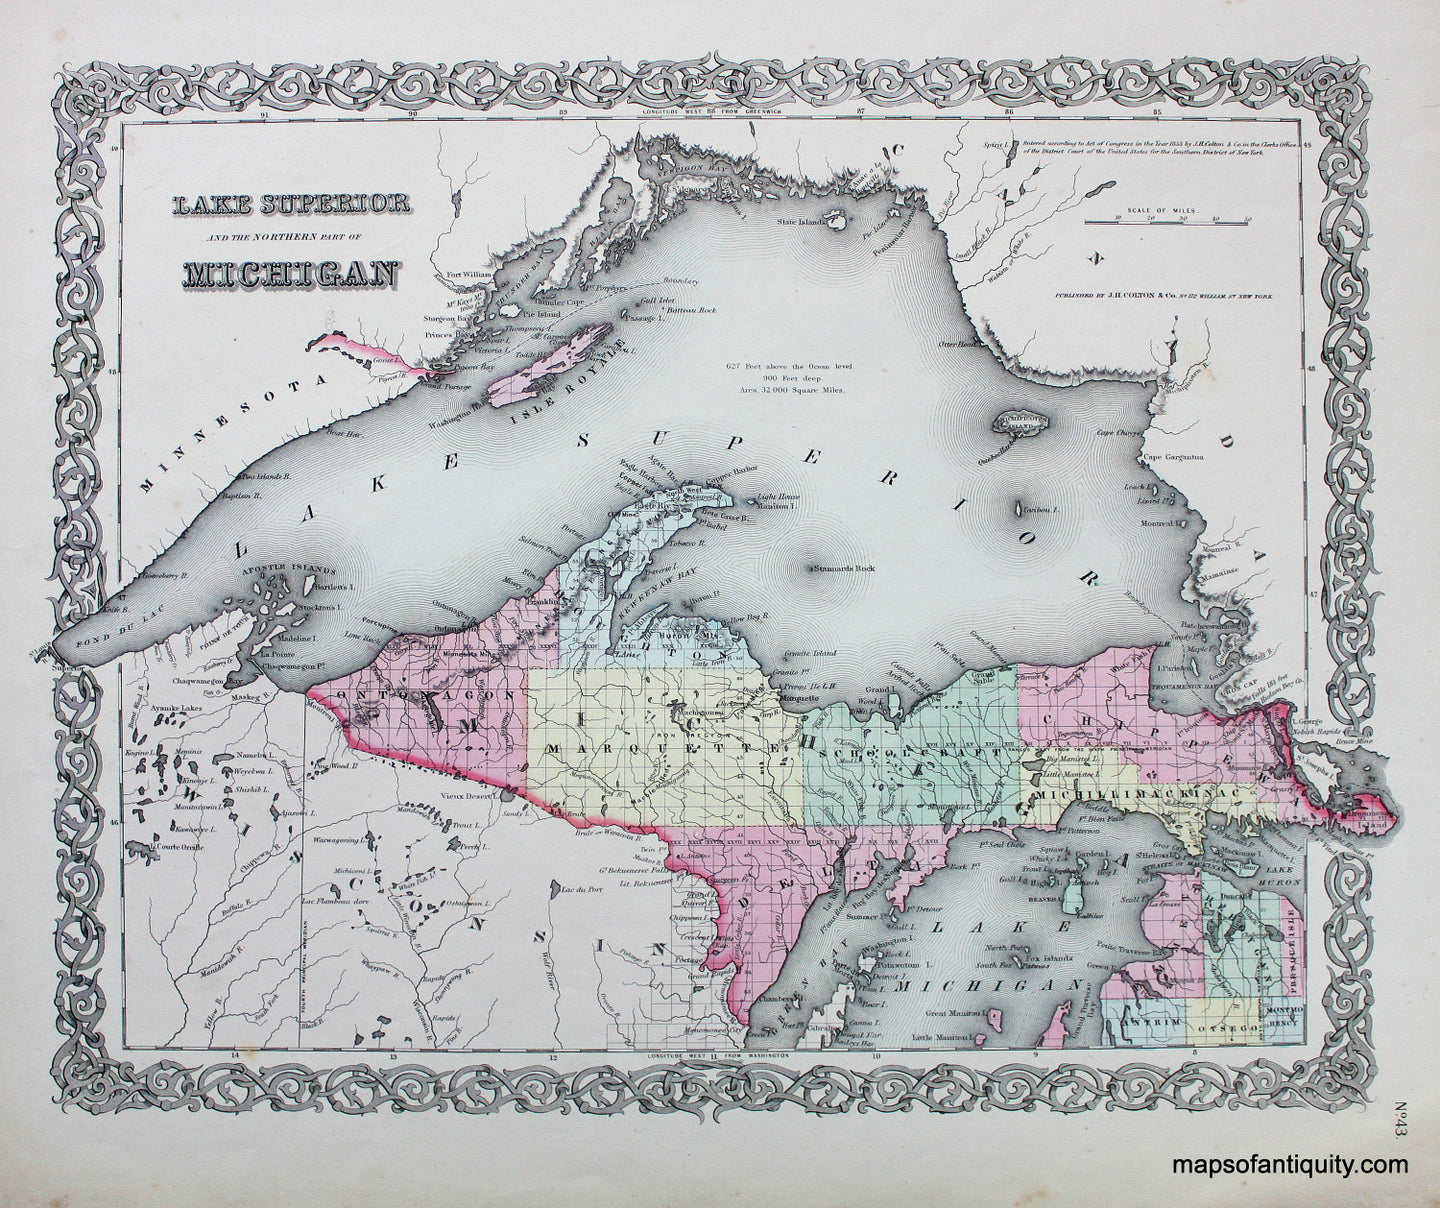 Antique-Hand-Colored-Map-Colton's-Lake-Superior-and-the-Northern-Part-of-Michigan-******-United-States-Michigan-1855-Colton-Maps-Of-Antiquity